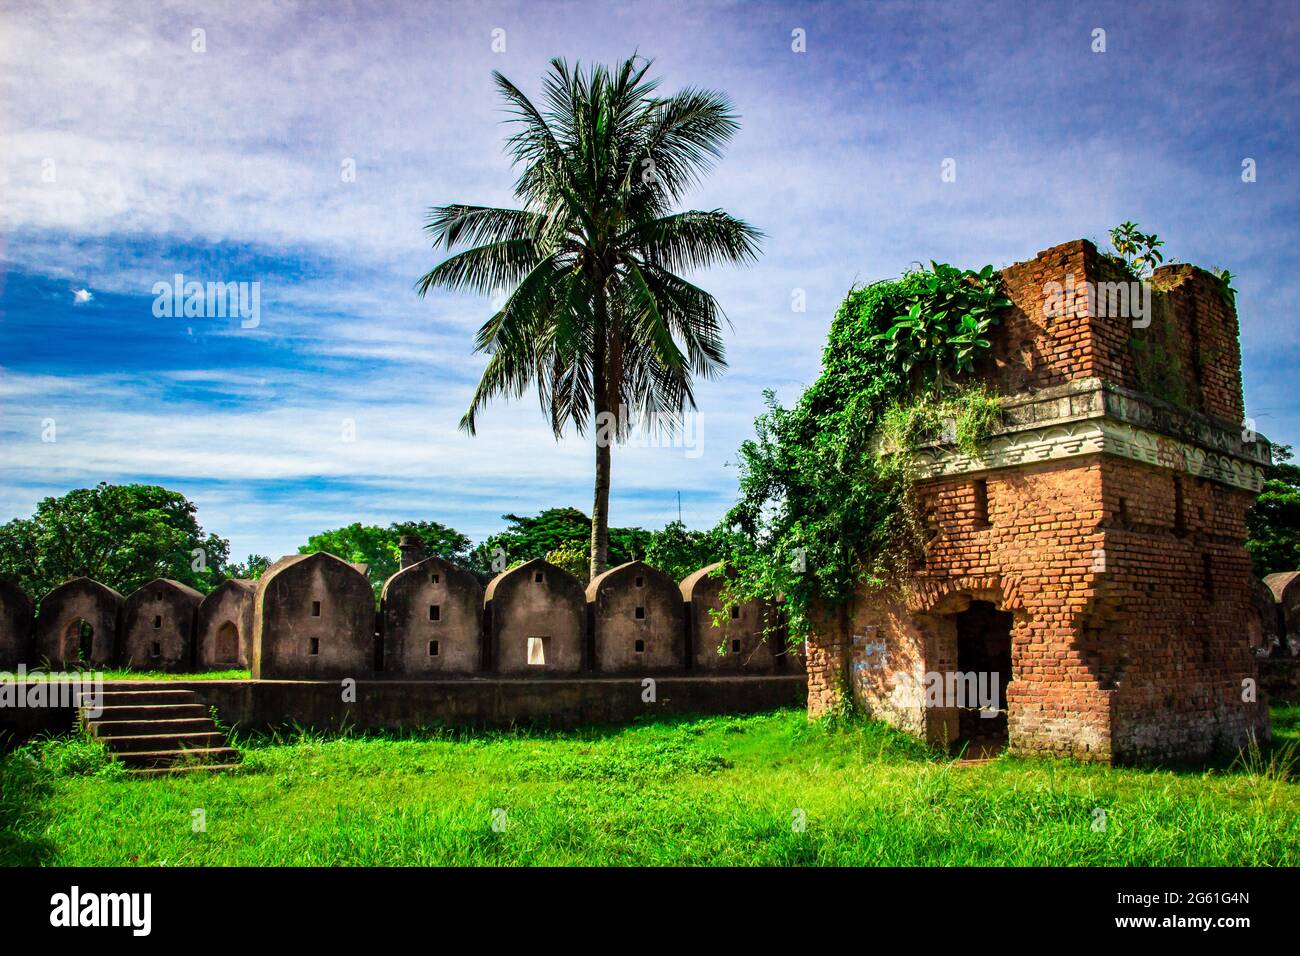 A ruin historical red fort, I captured this image on September 21, 2018, from Narayanganj, Bangladesh, South Asia Stock Photo